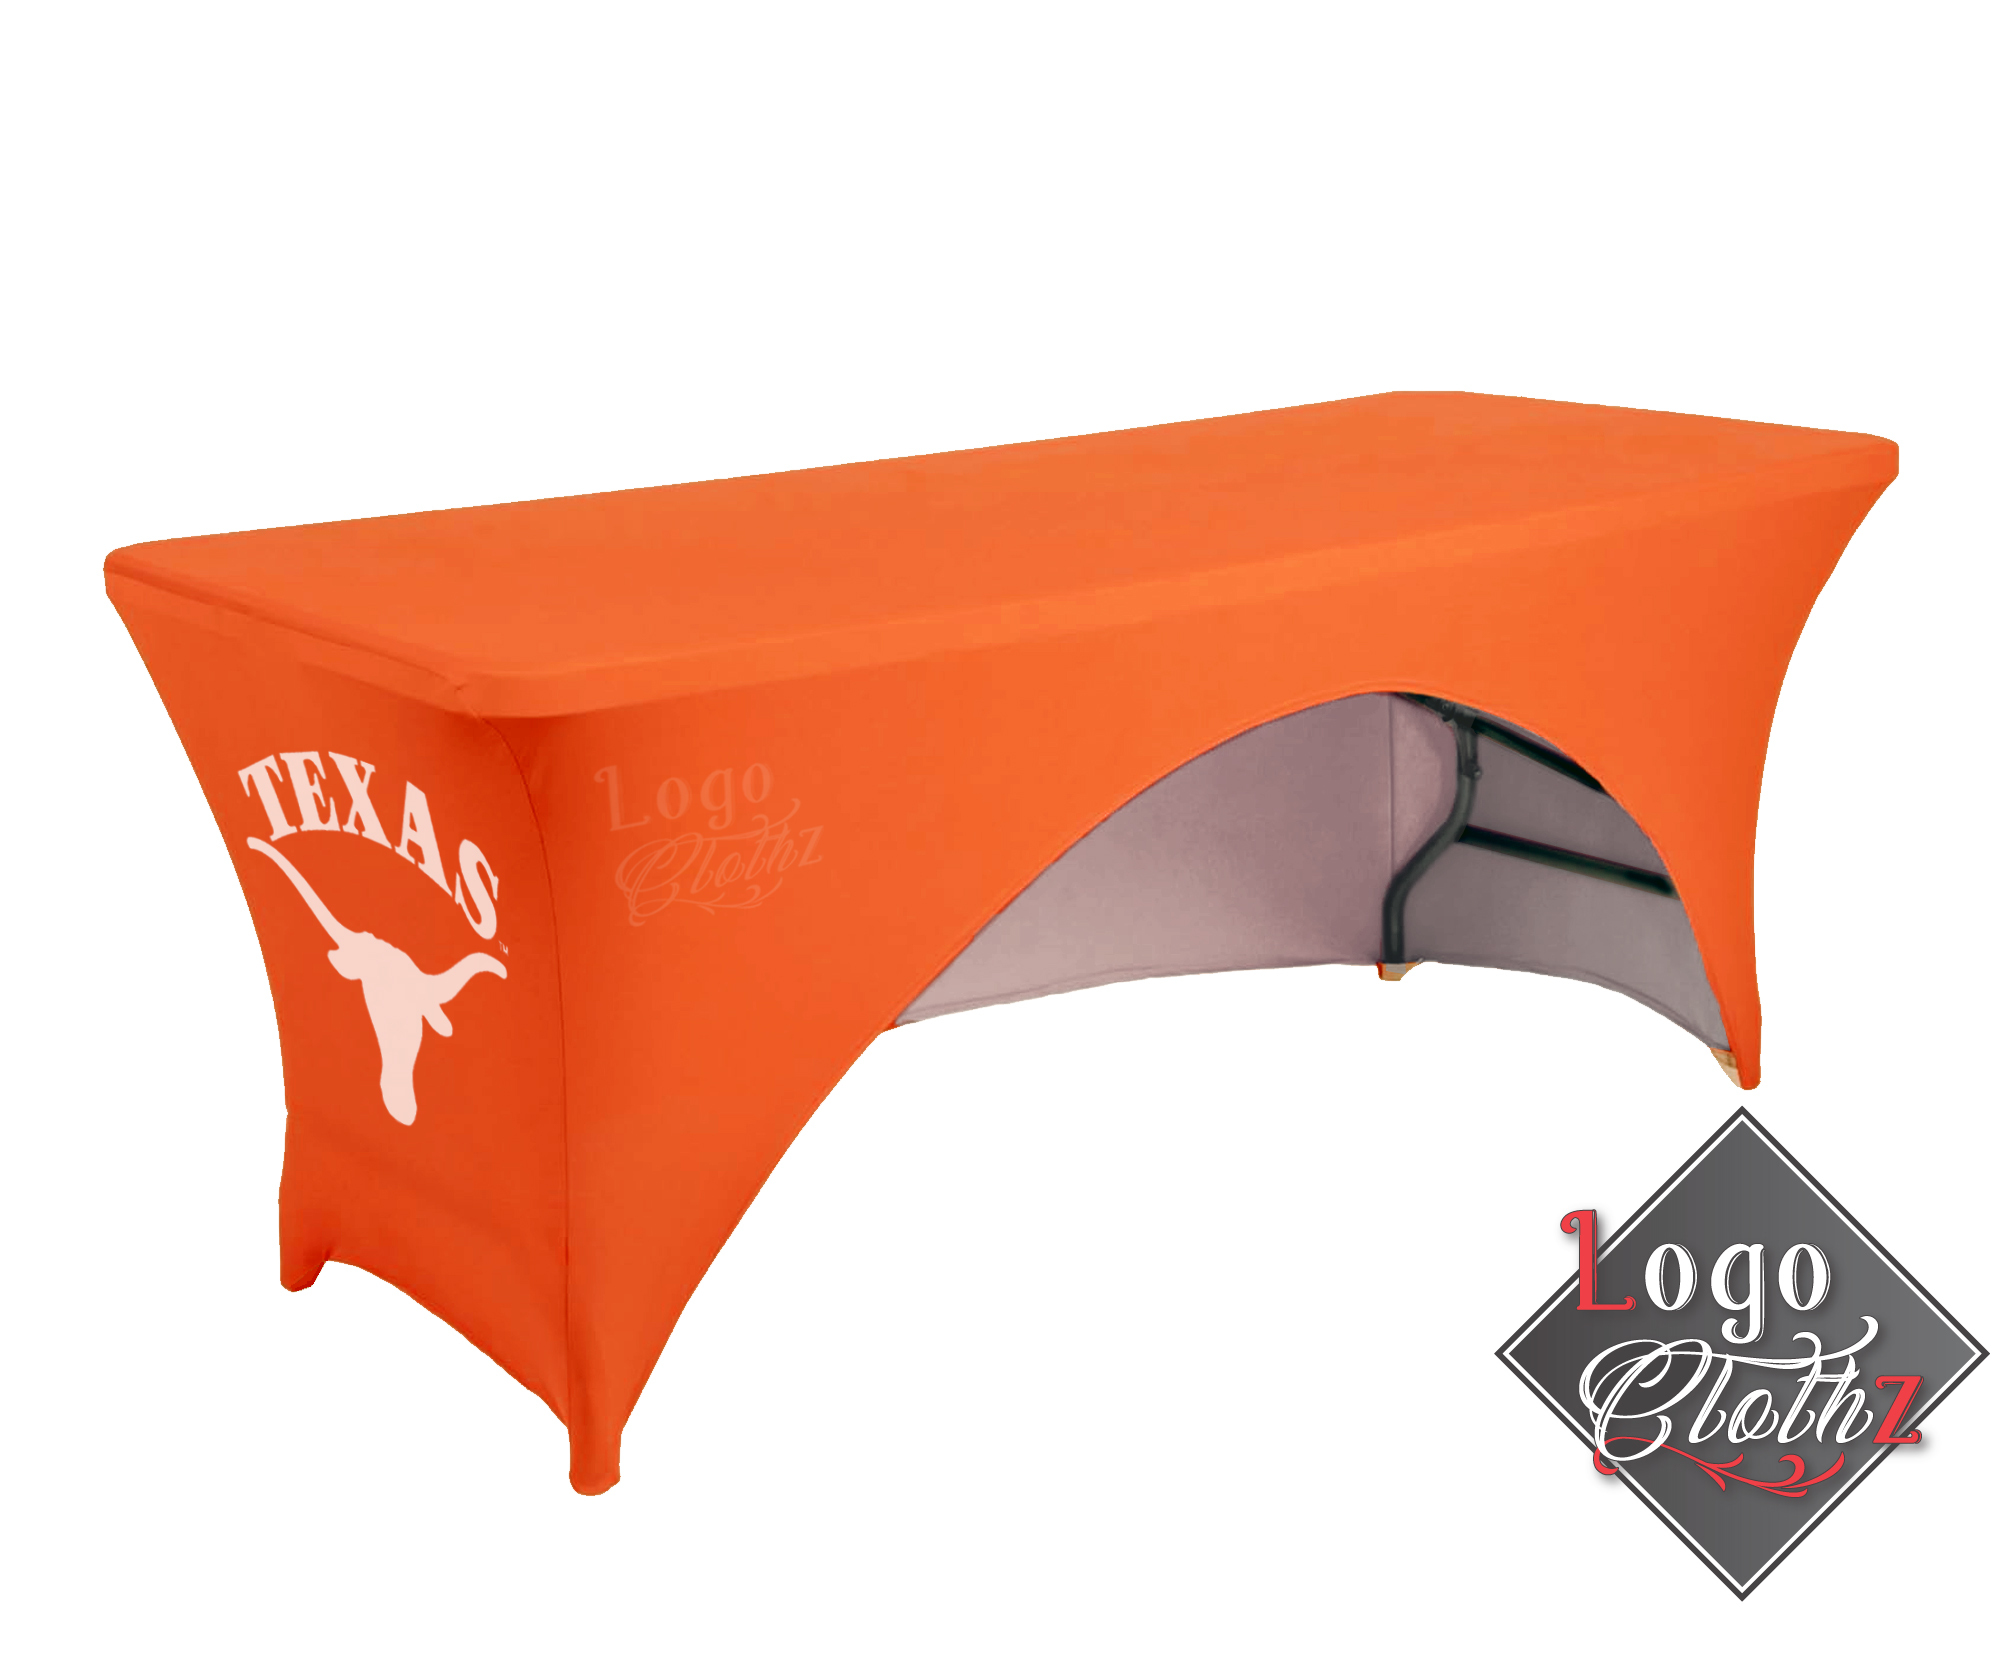 3-sided-open-back-spandex-table-cover-with-logo-print.jpg